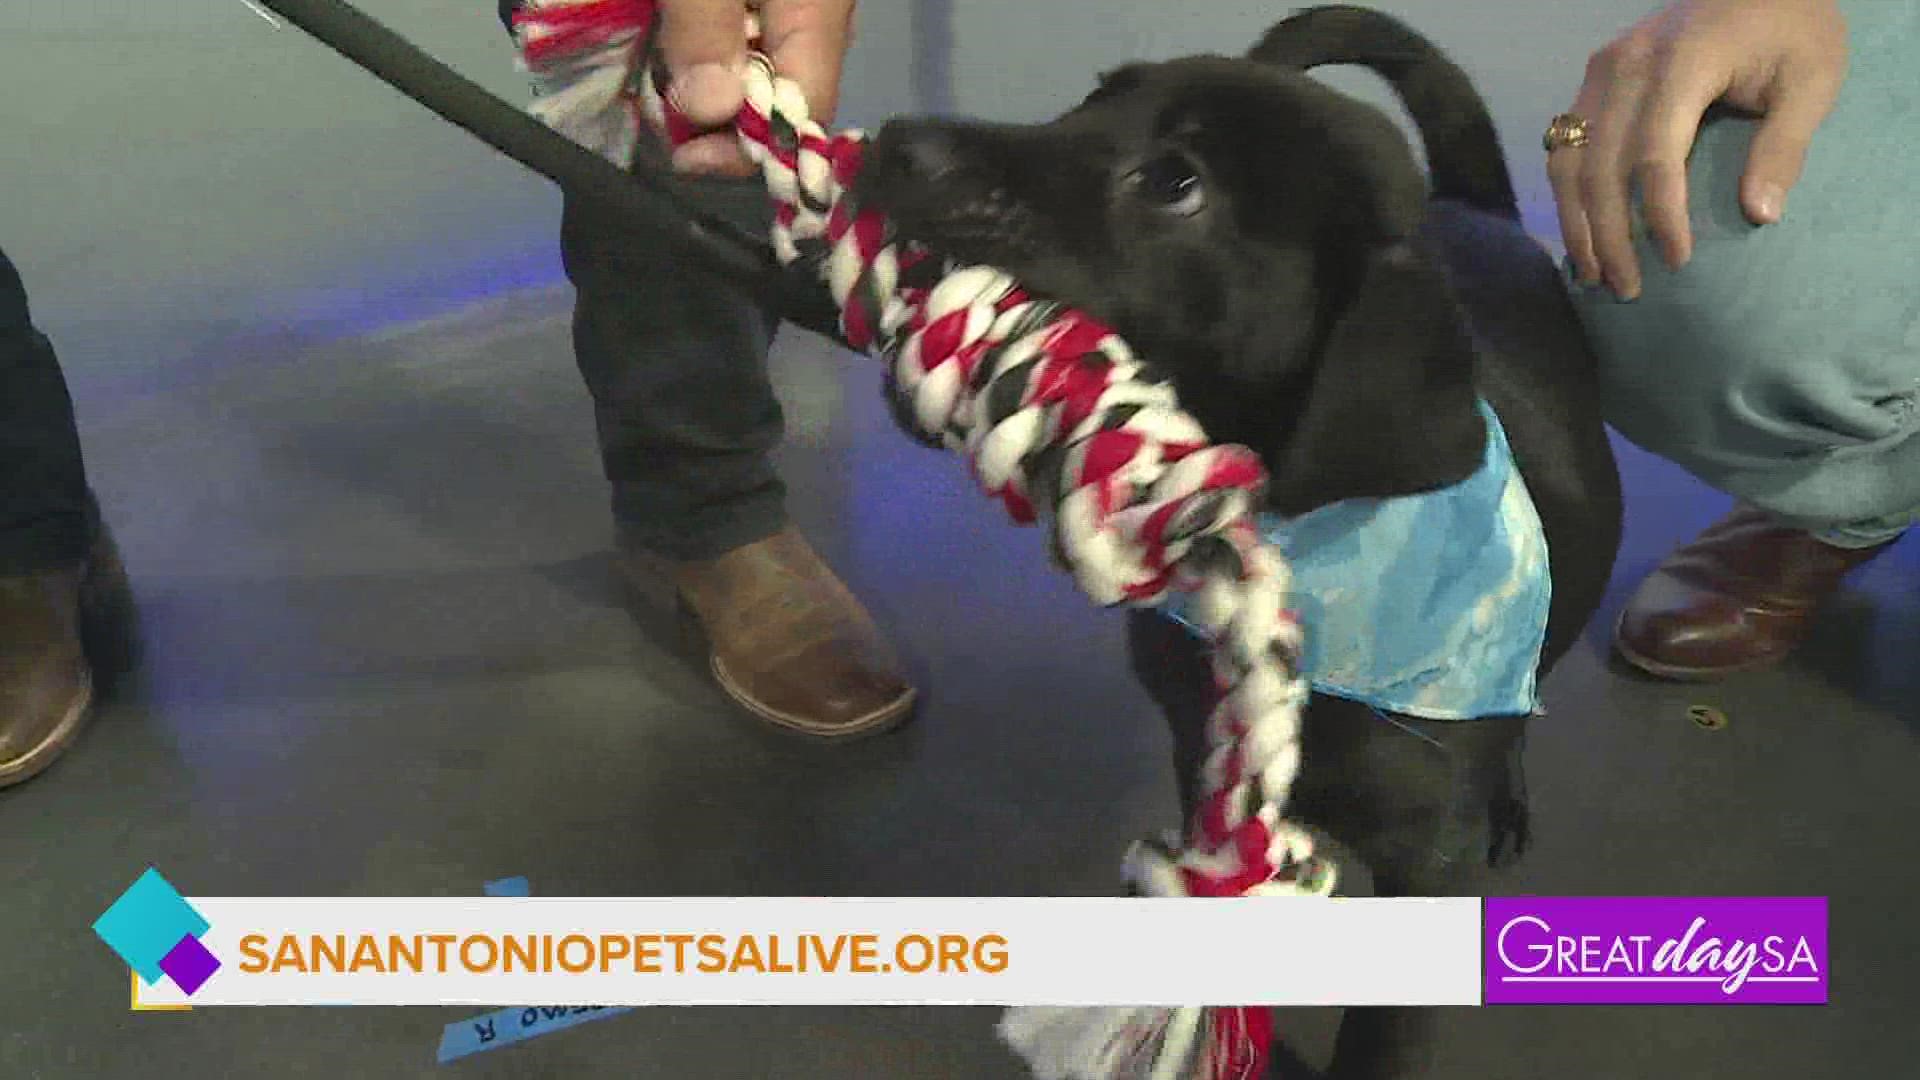 San Antonio Pets Alive needs your help finding fur-ever homes for their animals